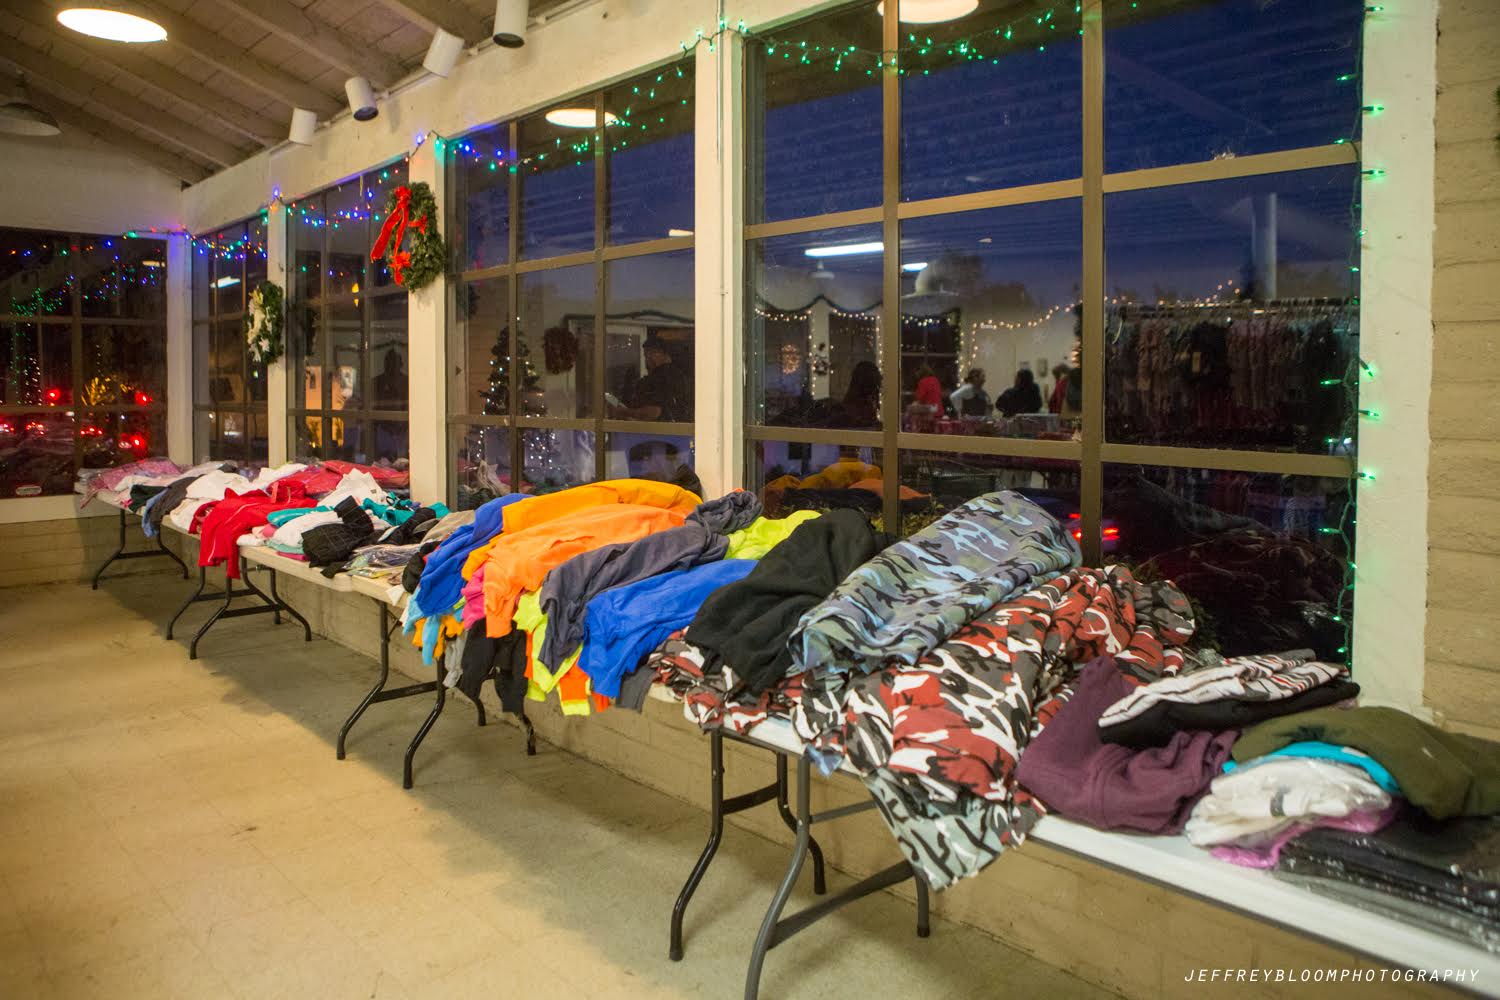 Buellton Rotary, PHP team up to collect coats